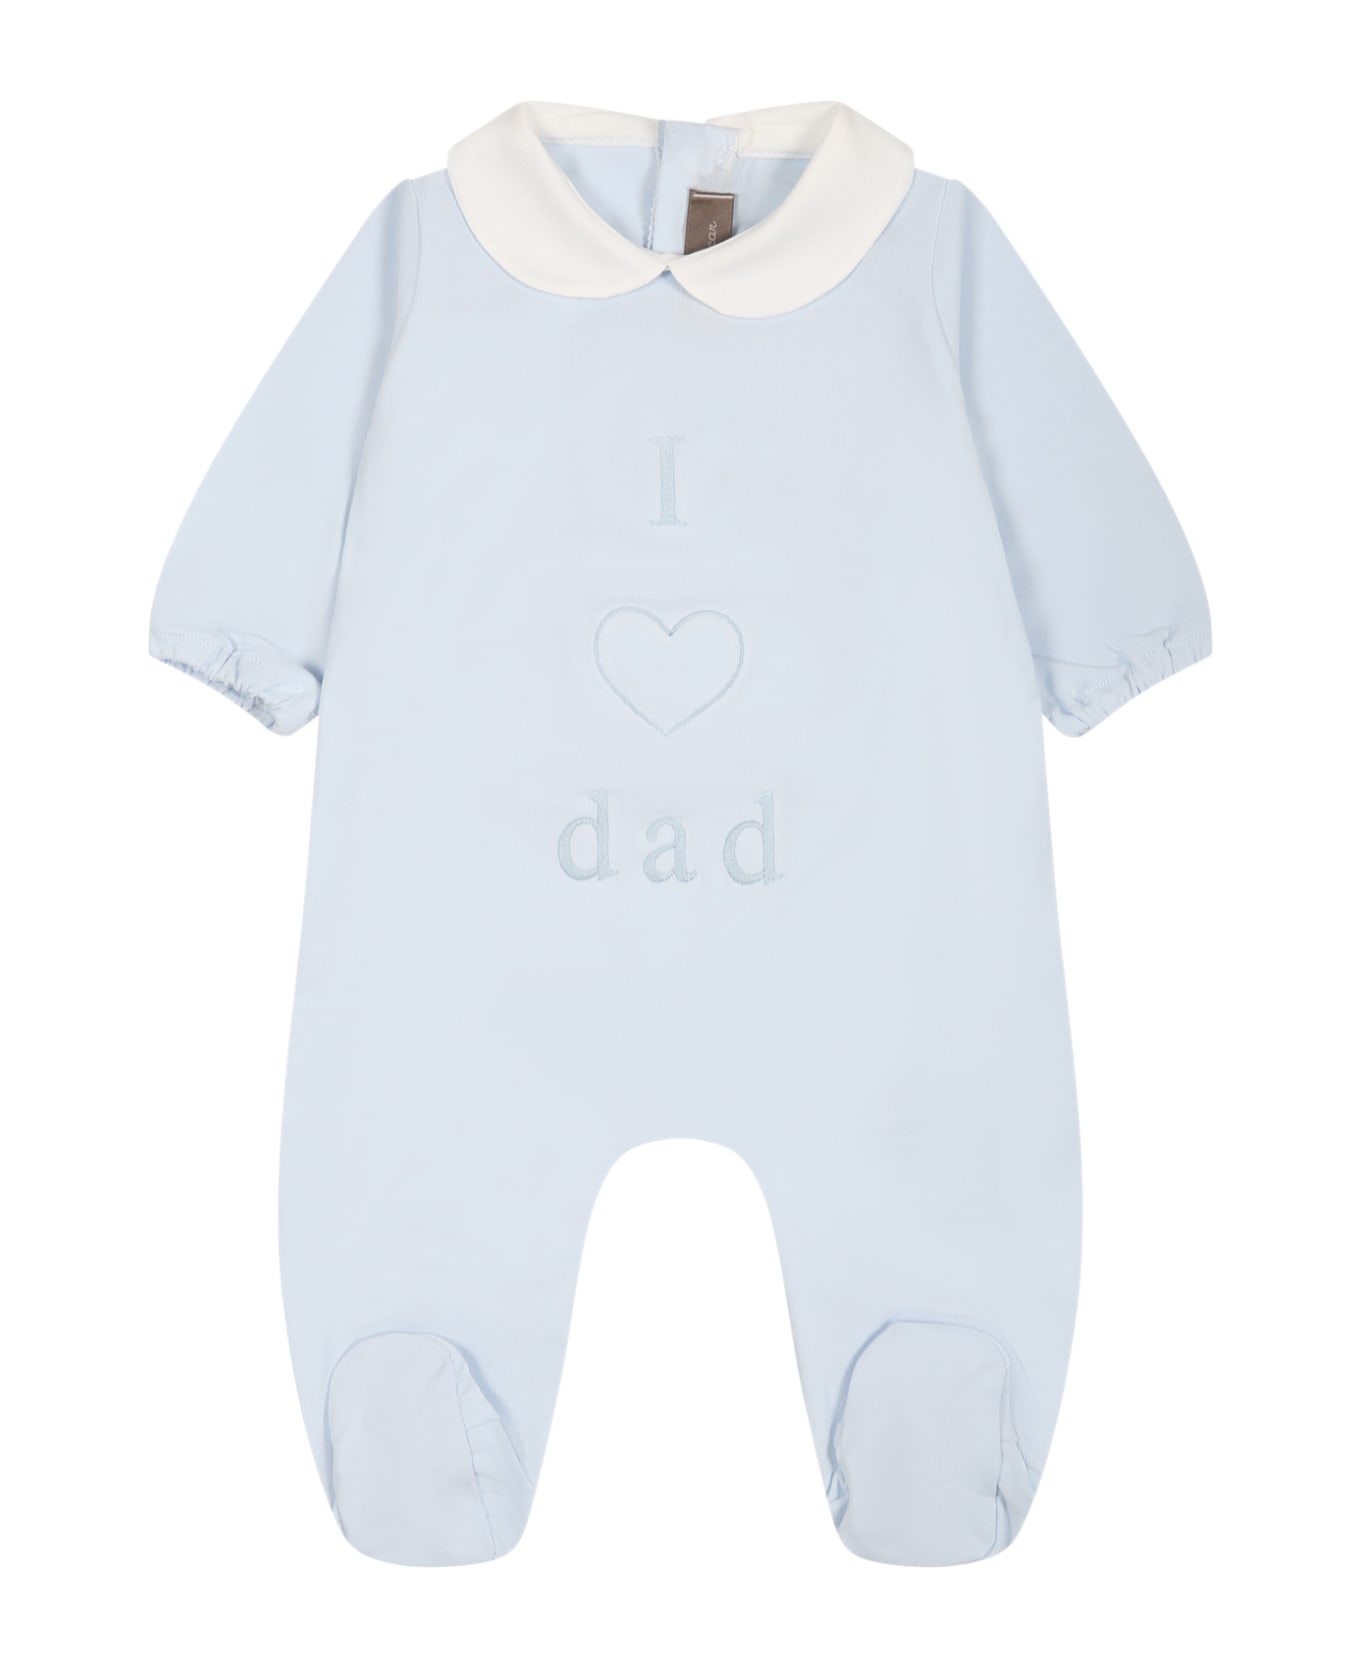 Little Bear Light Blue Onesie For Baby Boy With Writing And Heart - Cielo